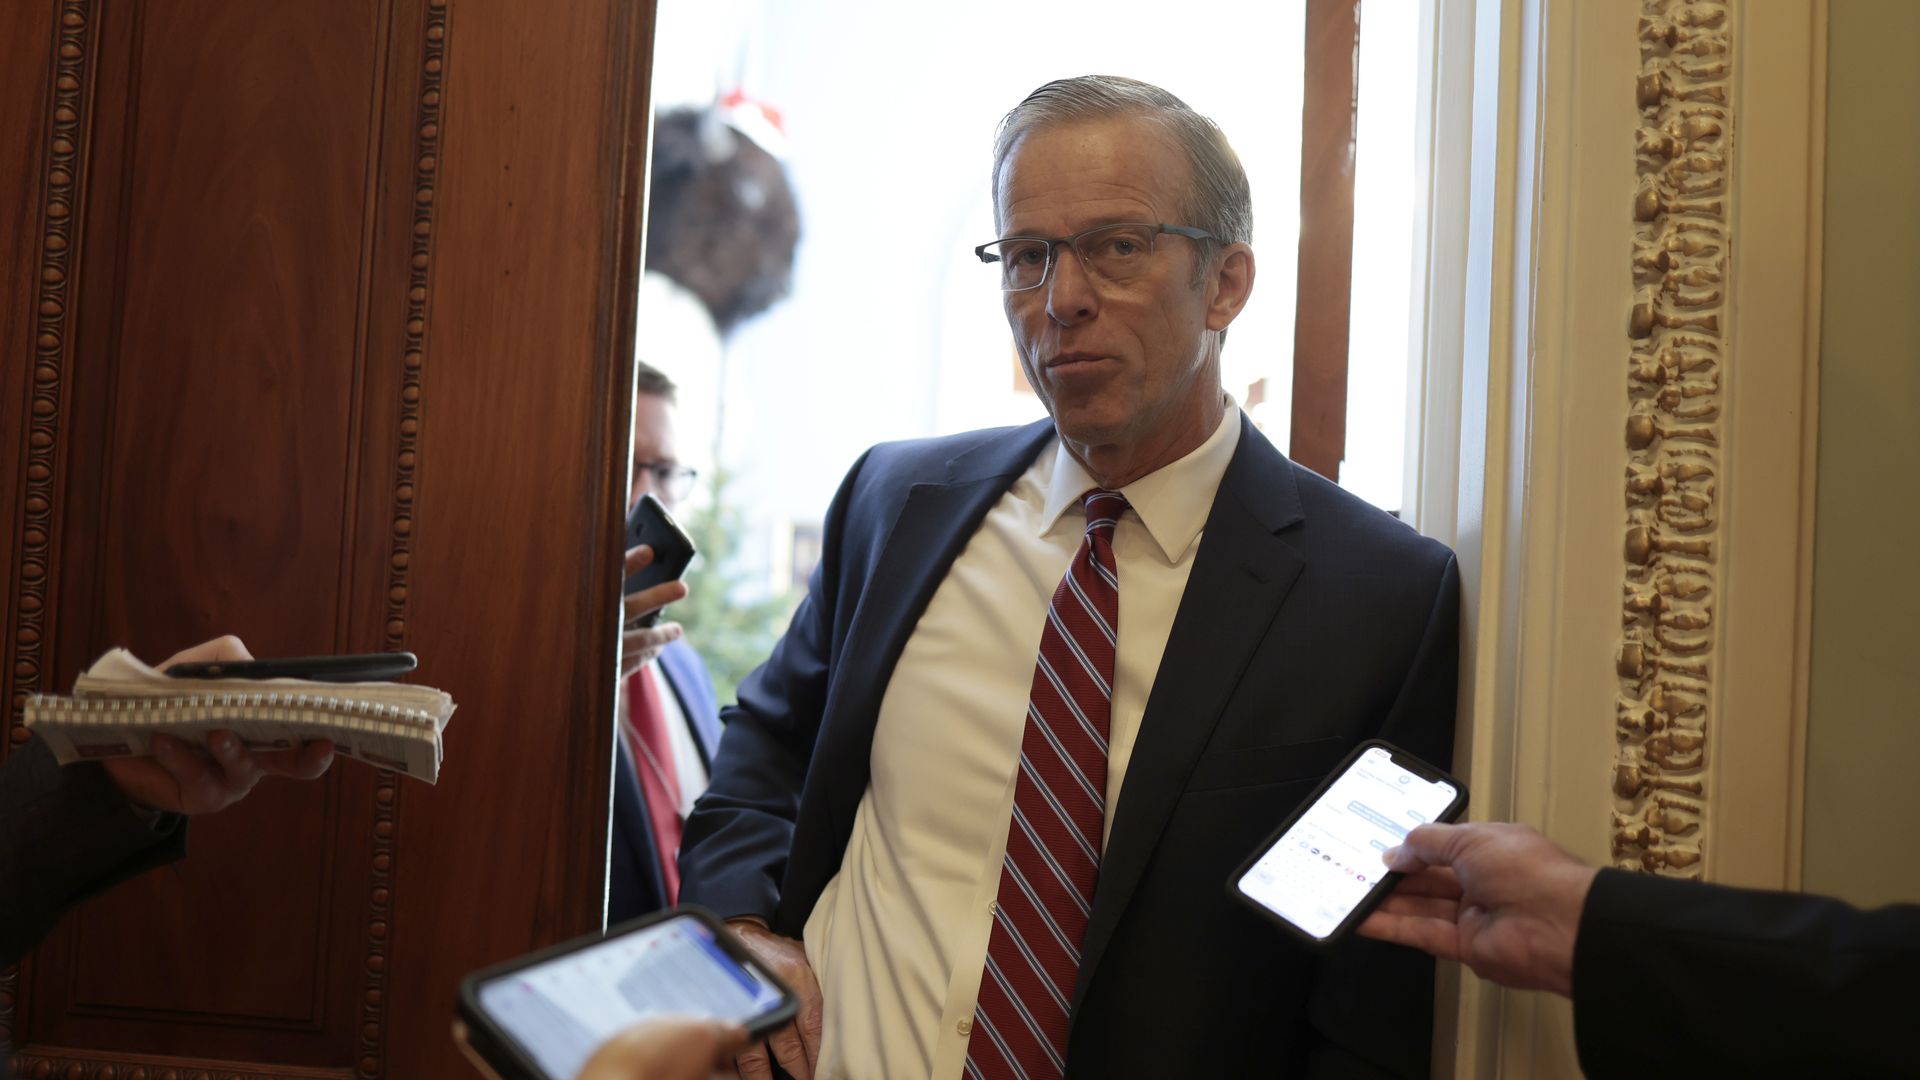 Sen. John Thune (R-SD) speaks with reporters outside his office in the U.S. Capitol Building on January 04, 2022 in Washington, DC.